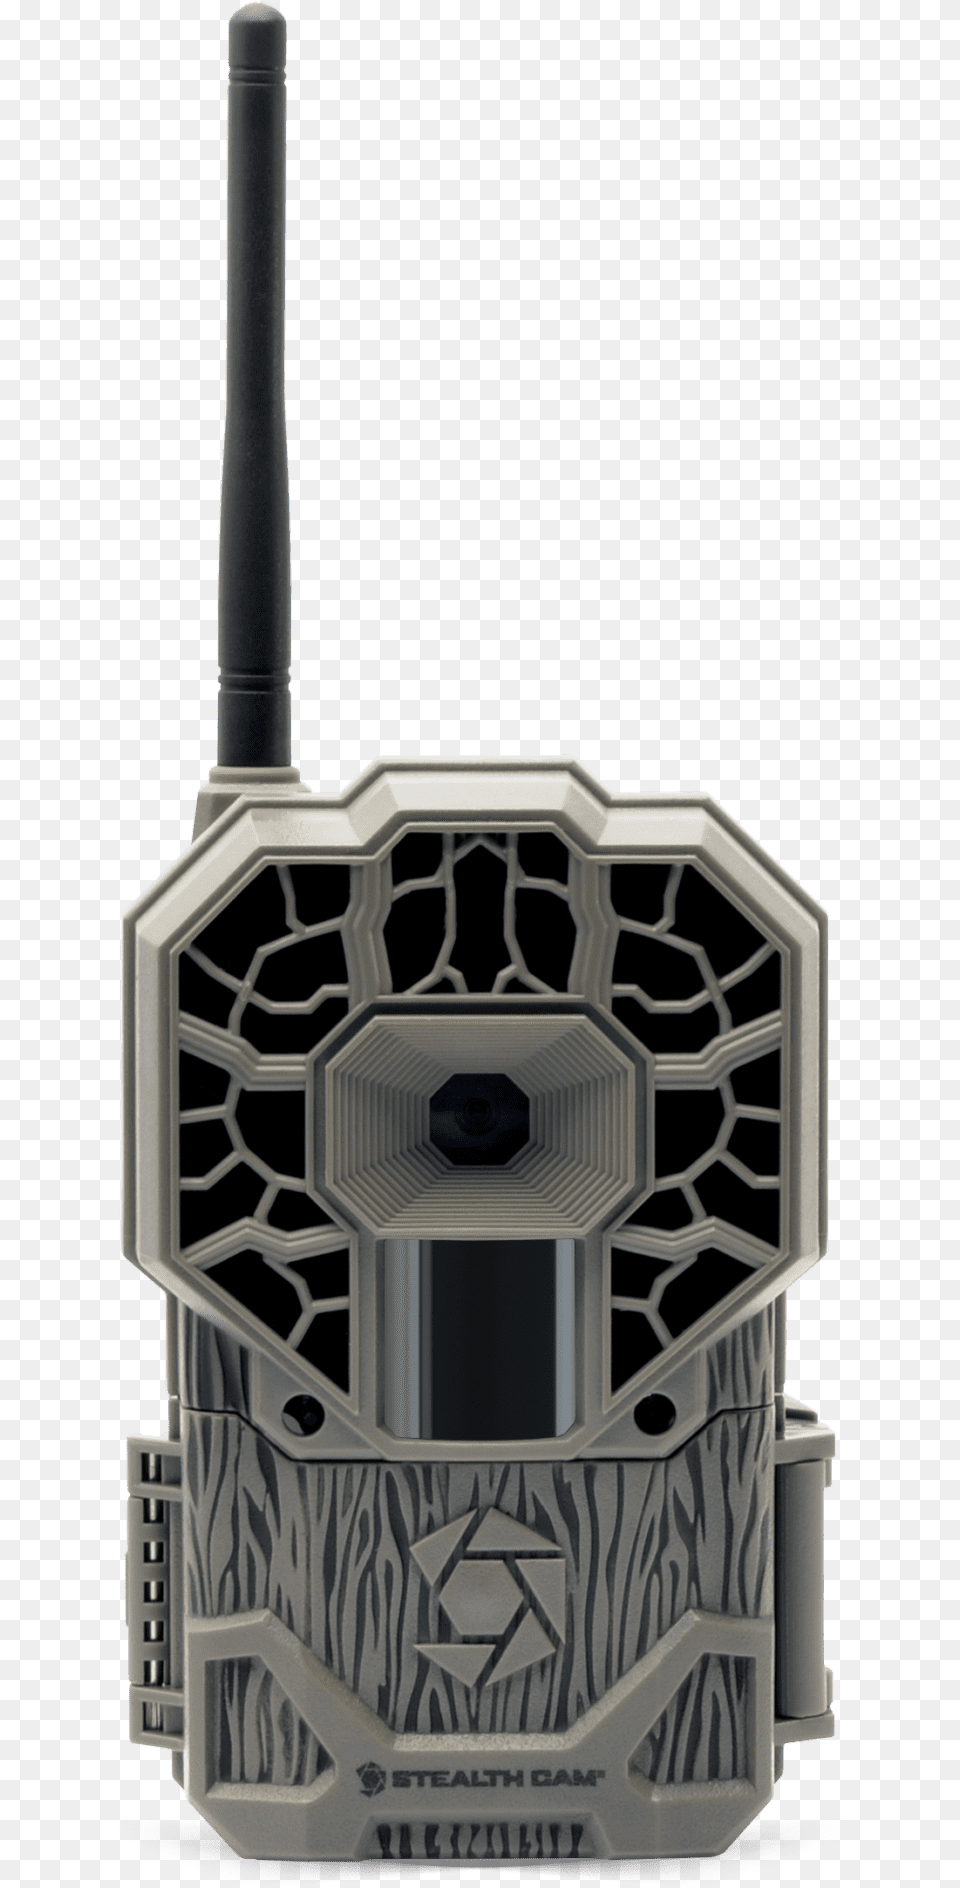 Stealth Cam Gxvrw Cellular Trail Camera, Electronics, Hardware, Router Free Png Download